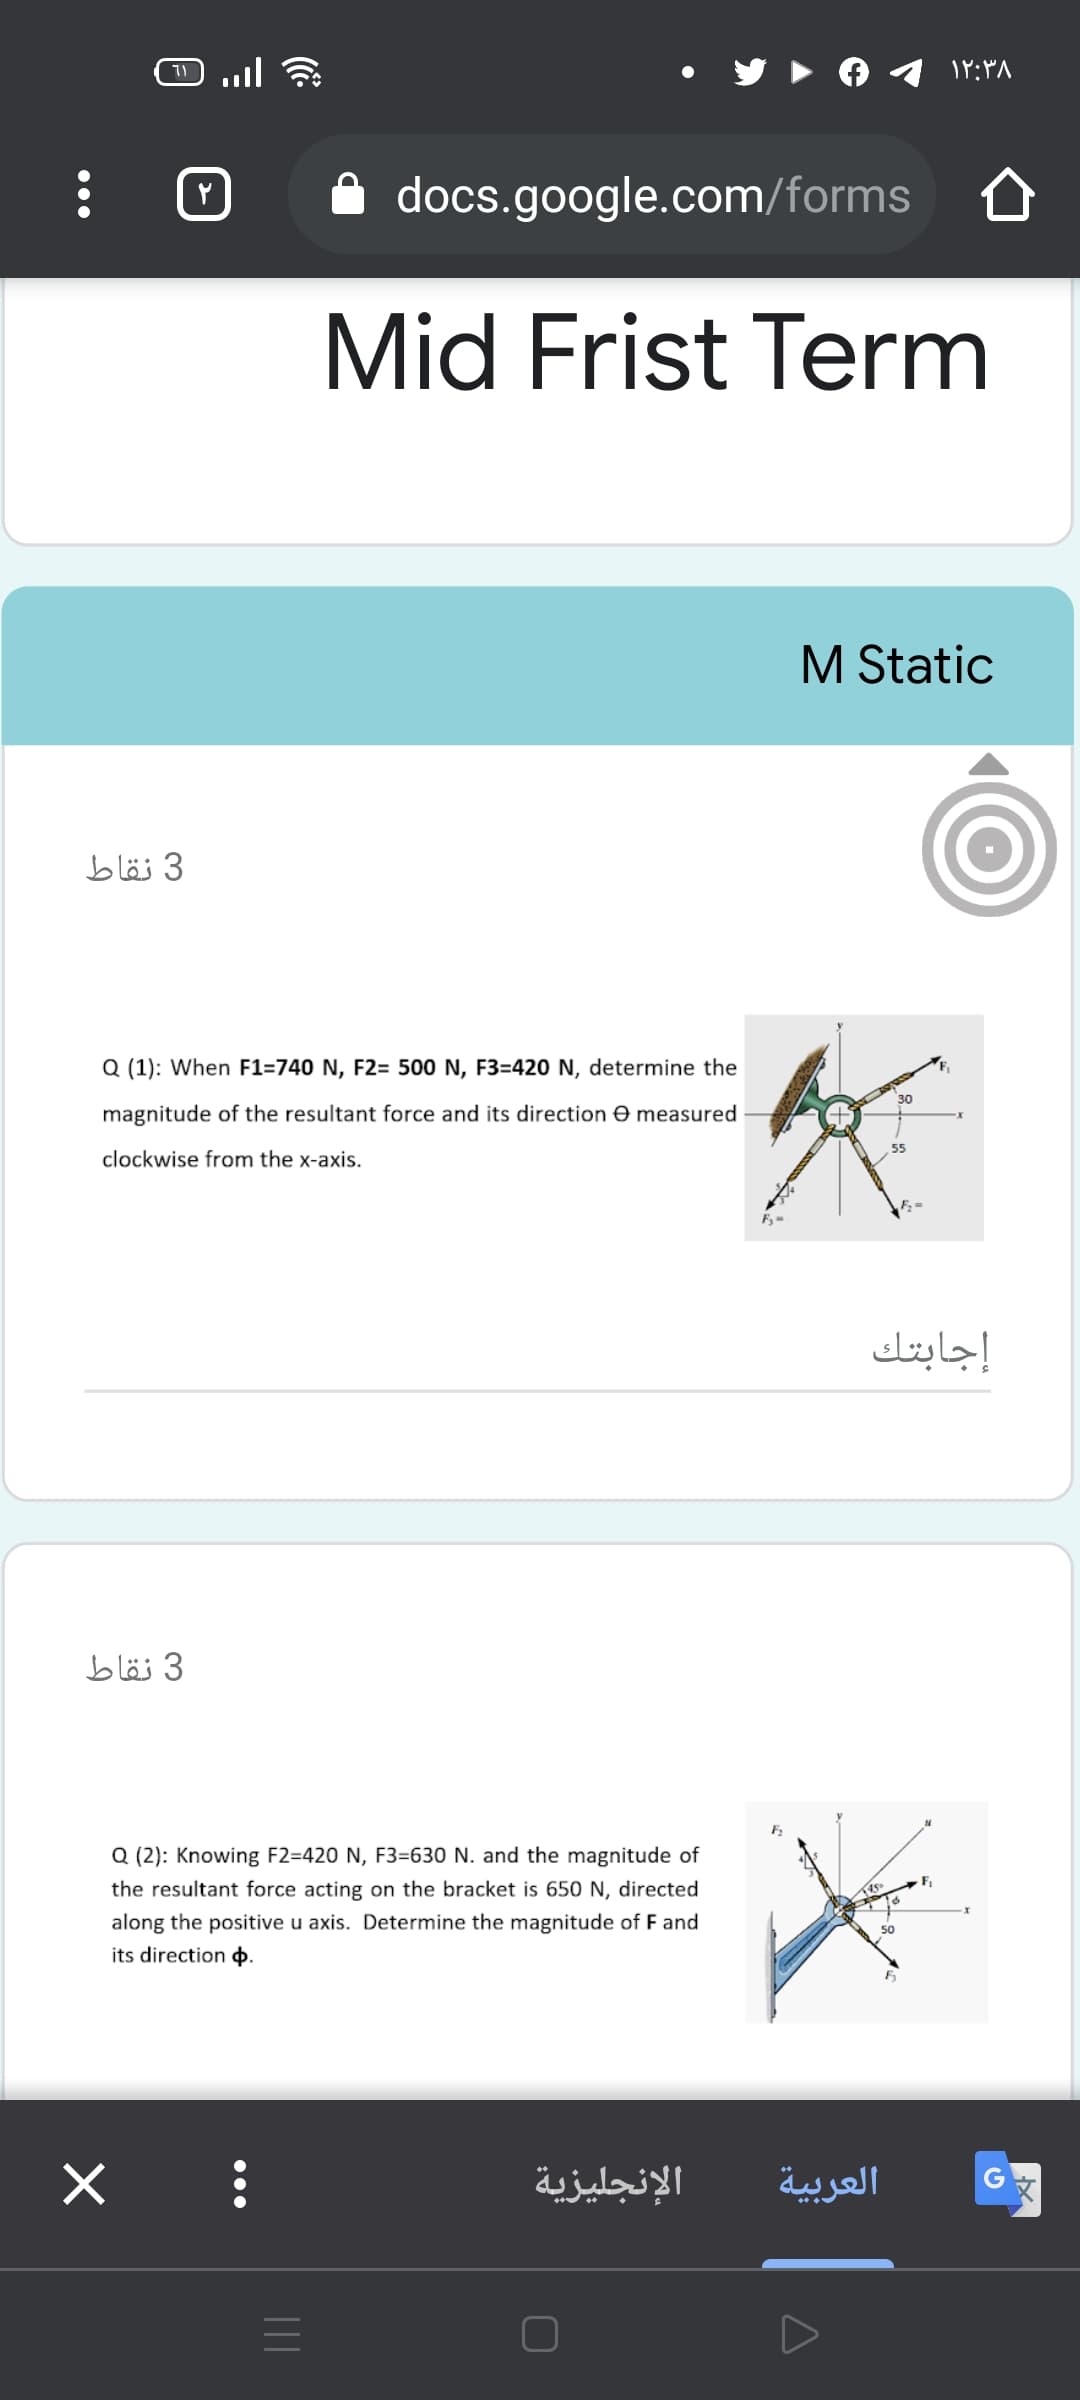 11
۱۲:۳۸
docs.google.com/forms
Mid Frist Term
M Static
3 نقاط
Q (1): When F1=740 N, F2= 500 N, F3=420 N, determine the
30
magnitude of the resultant force and its direction e measured
55
clockwise from the x-axis.
إجابتك
3 نقاط
Q (2): Knowing F2=420 N, F3=630 N. and the magnitude of
the resultant force acting on the bracket is 650 N, directed
along the positive u axis. Determine the magnitude of F and
its direction .
الإنجليزية
العربية
